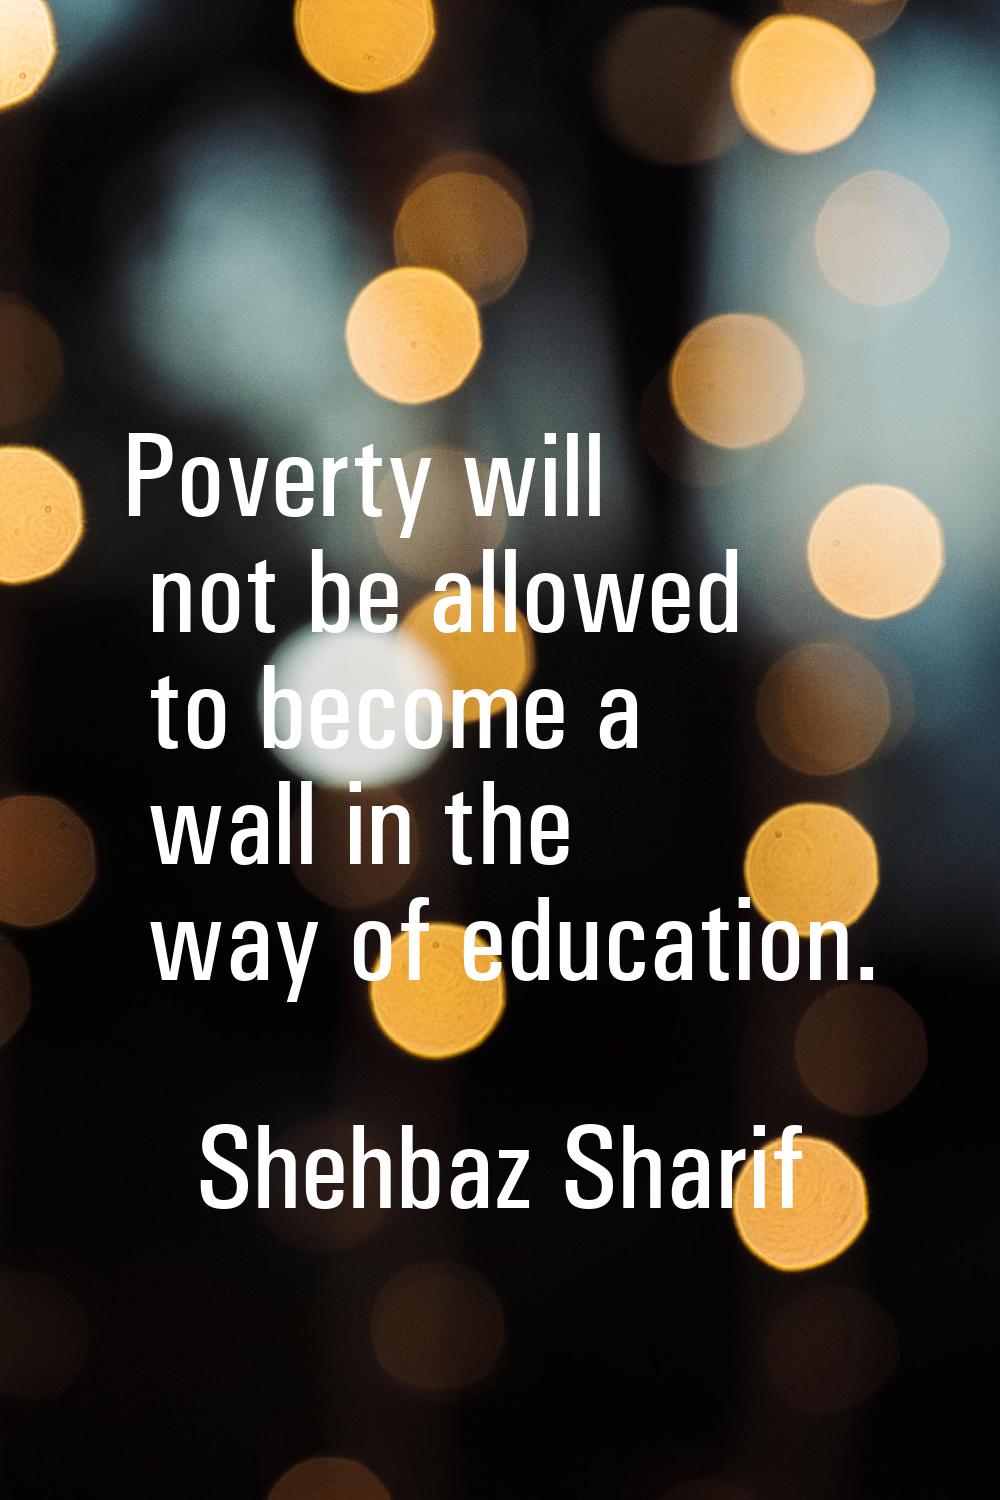 Poverty will not be allowed to become a wall in the way of education.